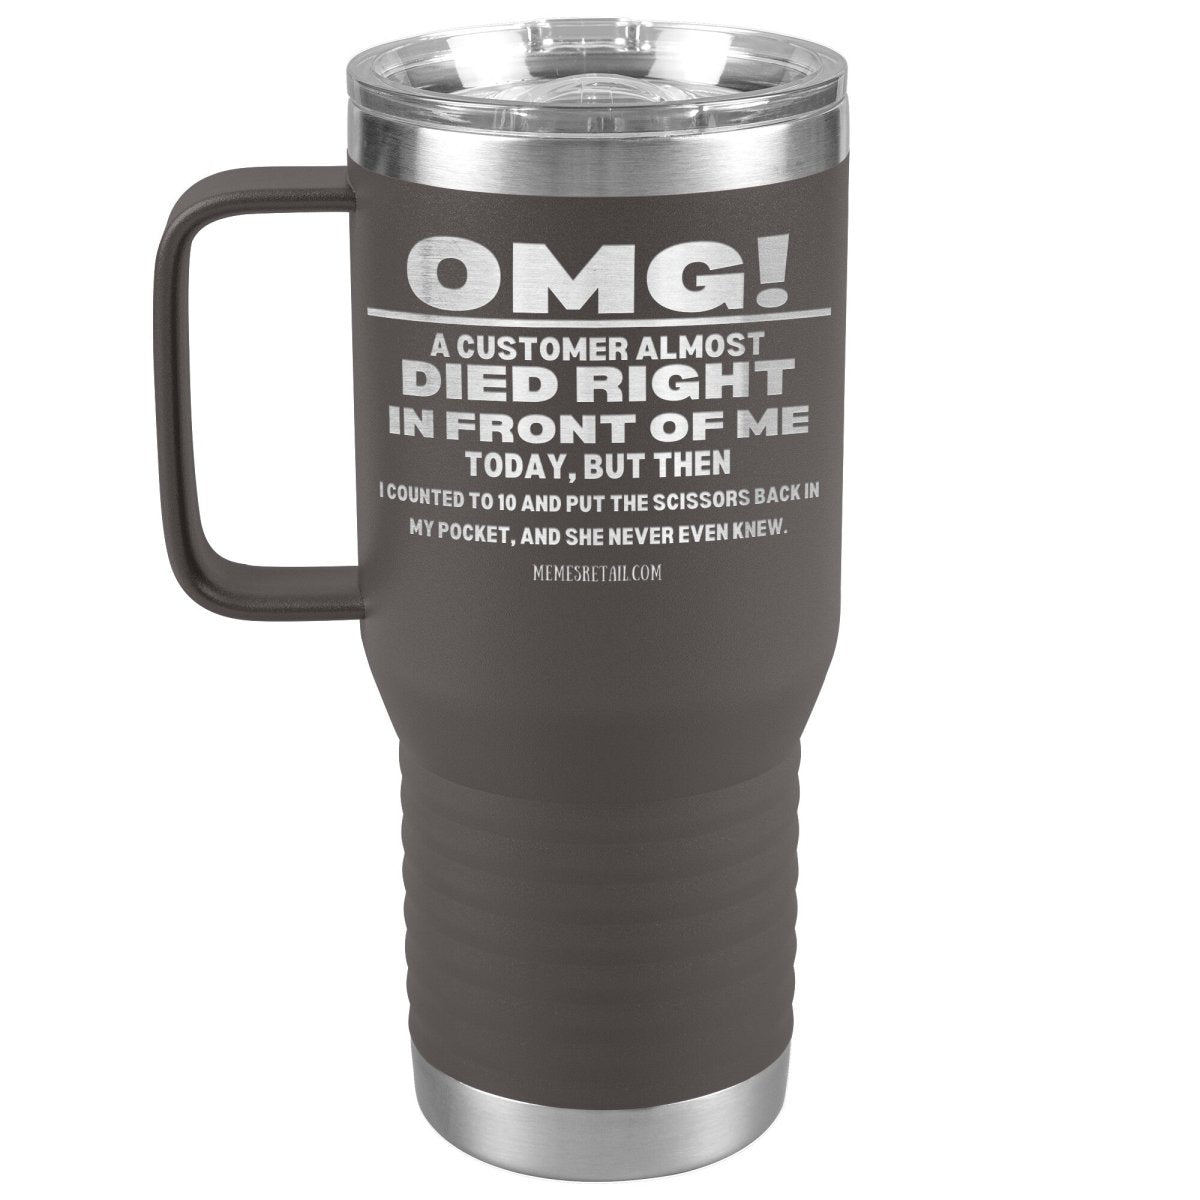 OMG! A Customer Almost Died Right In Front Of Me Tumbler, 20oz Travel Tumbler / Pewter - MemesRetail.com